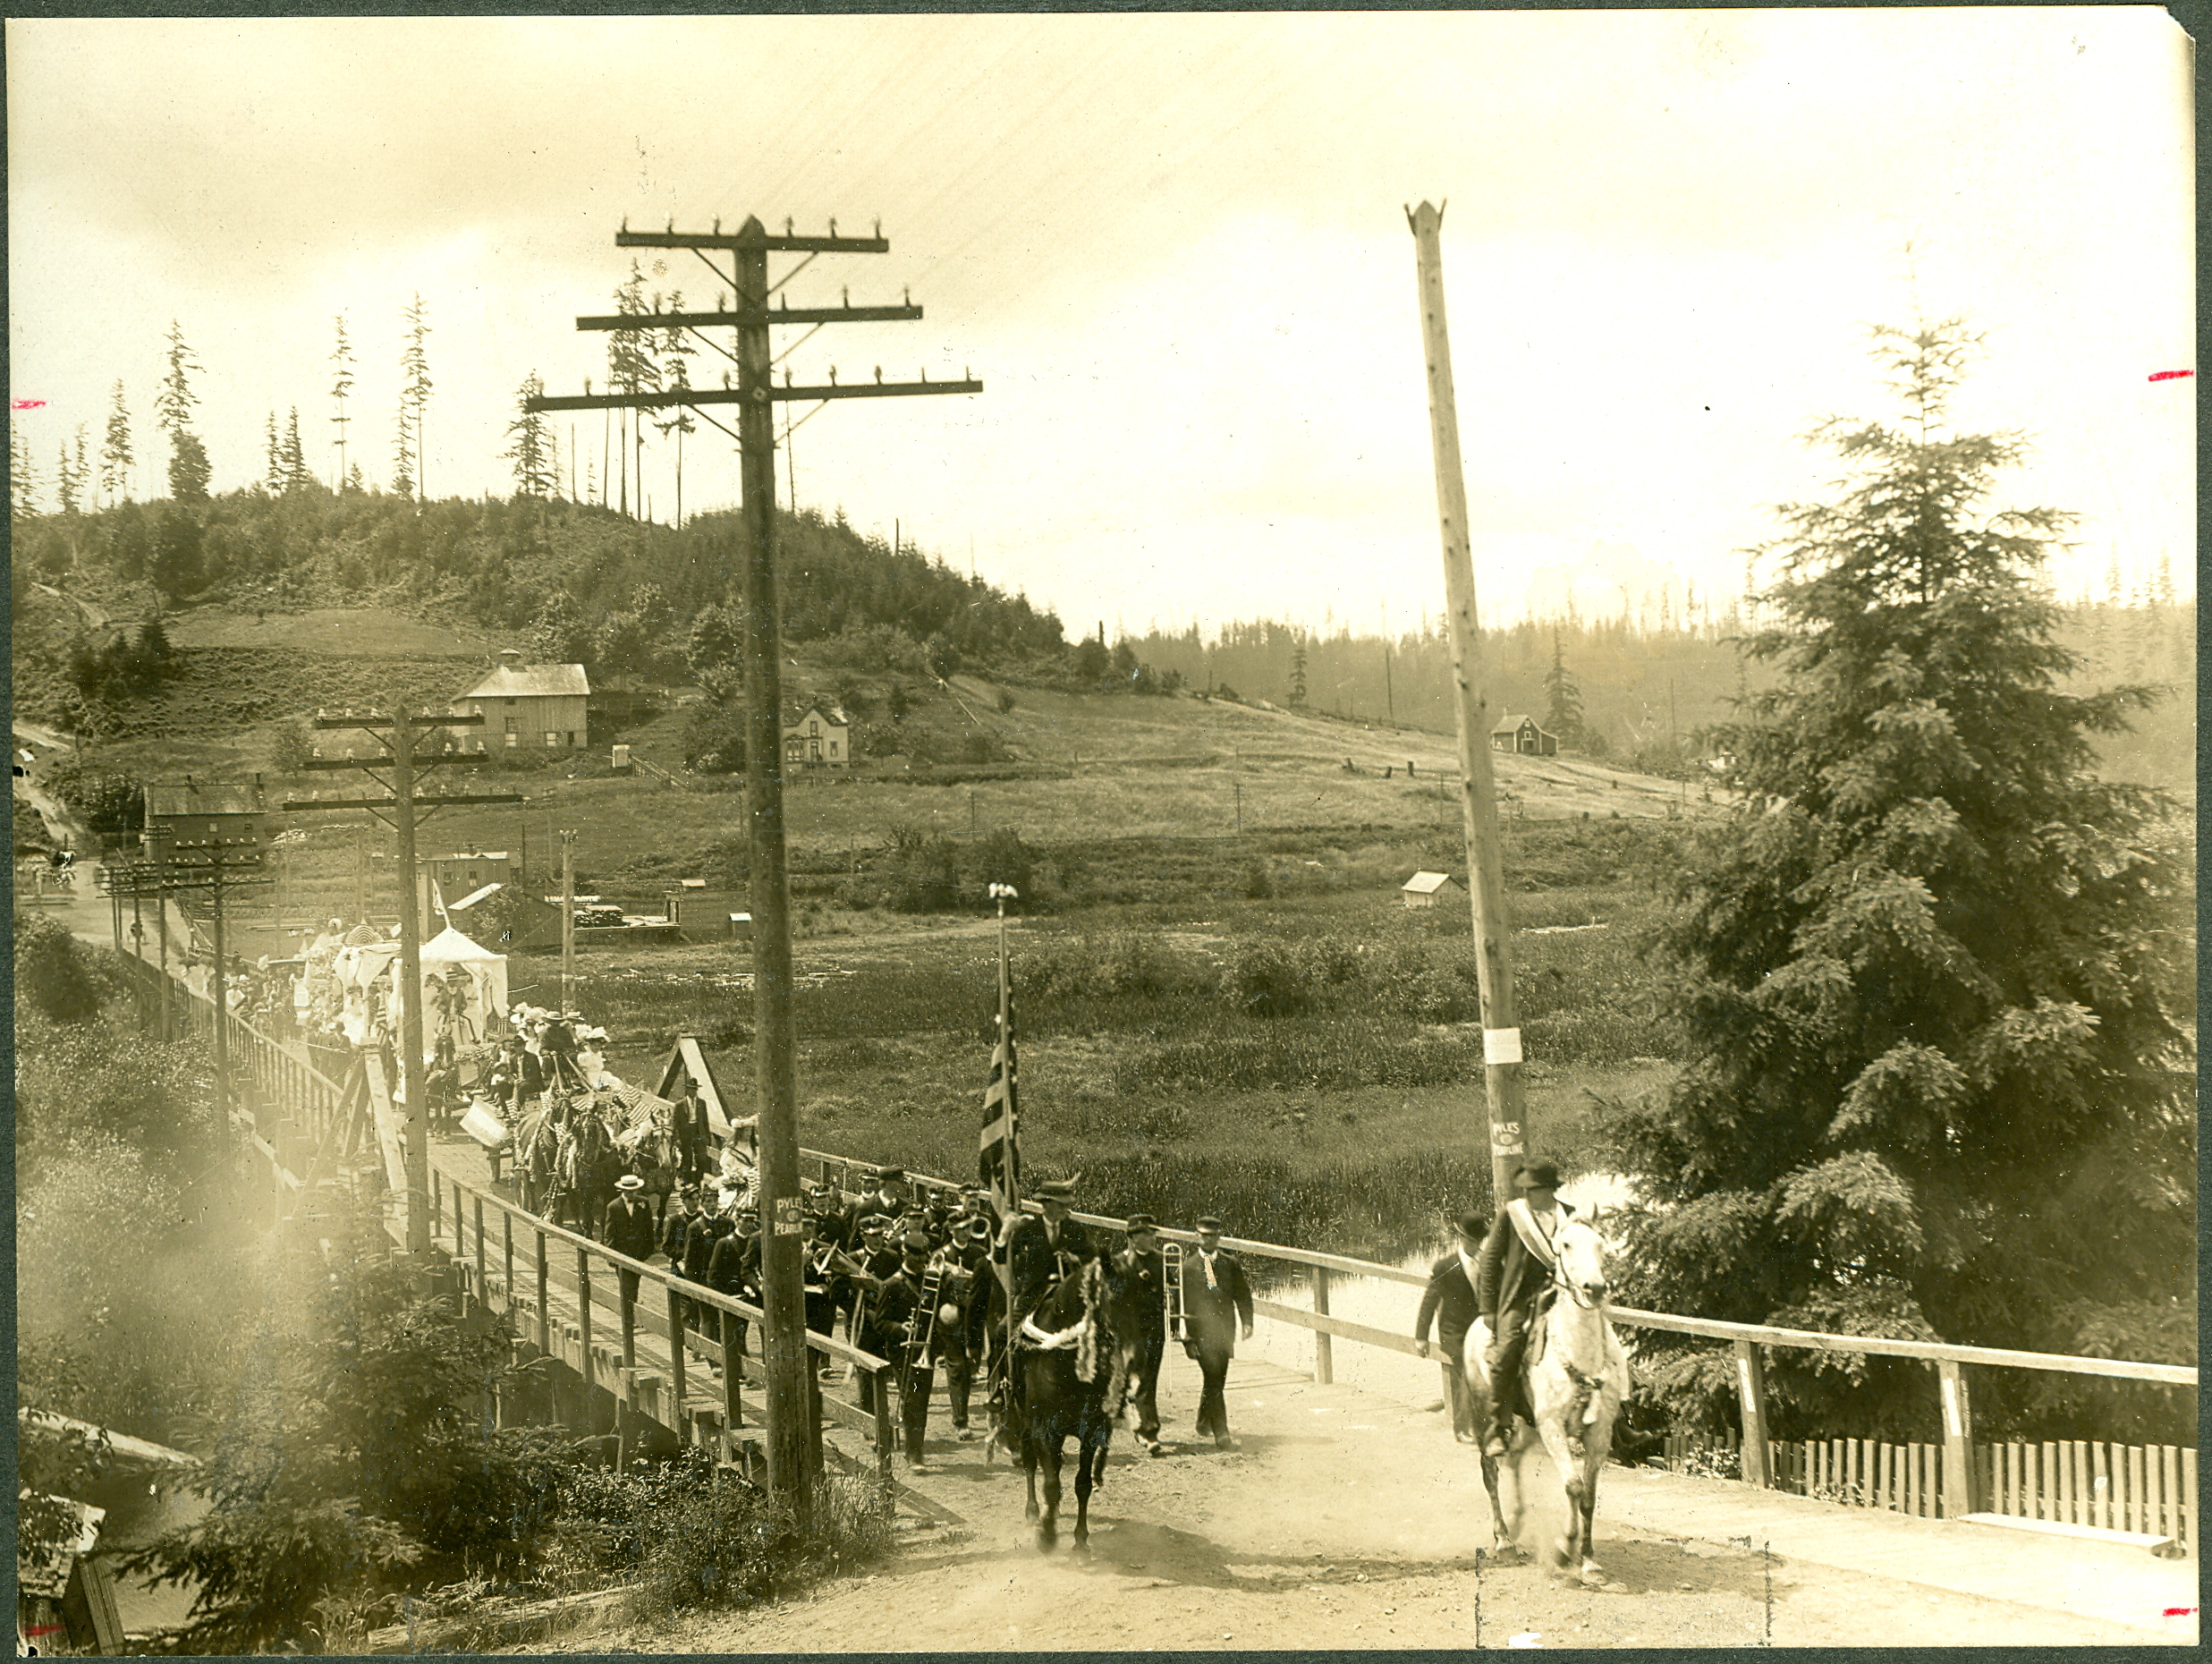 Fourth of July Parade, probably 1907, possibly 1908. On the back of a copy of the photo is typed, "Shows the Bothell Town Band leading a parade back across the Riverside Bridge toward Main Street." Several floats are following the band. A man with a sash mounted on a light-colored horse leads the parade, followed by a male flag bearer mounted on a dark horse. The poles on either side of the bridge in the foreground have signs pasted on them that read Pyles Pearline, which was an advertisement for a washing compound. Norway Hill is to the immediate right side of the bridge. Handwritten on the back of one of the original photos is, "House straight back from end of bridge was home of my grandmother Ida Kraase and her daughter Bertha and (her son ??) -in-law Robert John Magwood for many years. In center is old Pearson home. My father lived there ... little over a year and died there September 17, 1953. Beatrice Spinney McGarrigle." We believe the dark house closest to the road at the end of the bridge is the home of Ida Kraase. Squak Slough by Amy Stickney, says the photo probably taken in 1907. A copy of the photo says that it was taken prior to 1908. Handwritten in pencil on the back of one of the original photos is "1908." Handwritten on the back of one of the original photos is, "Donated by Beatrice McGarrigle 10/28/72." On the back of the copy of the photo is typed, "Photo loaned by Mrs. Ross Worley Sr., Woodinville." 